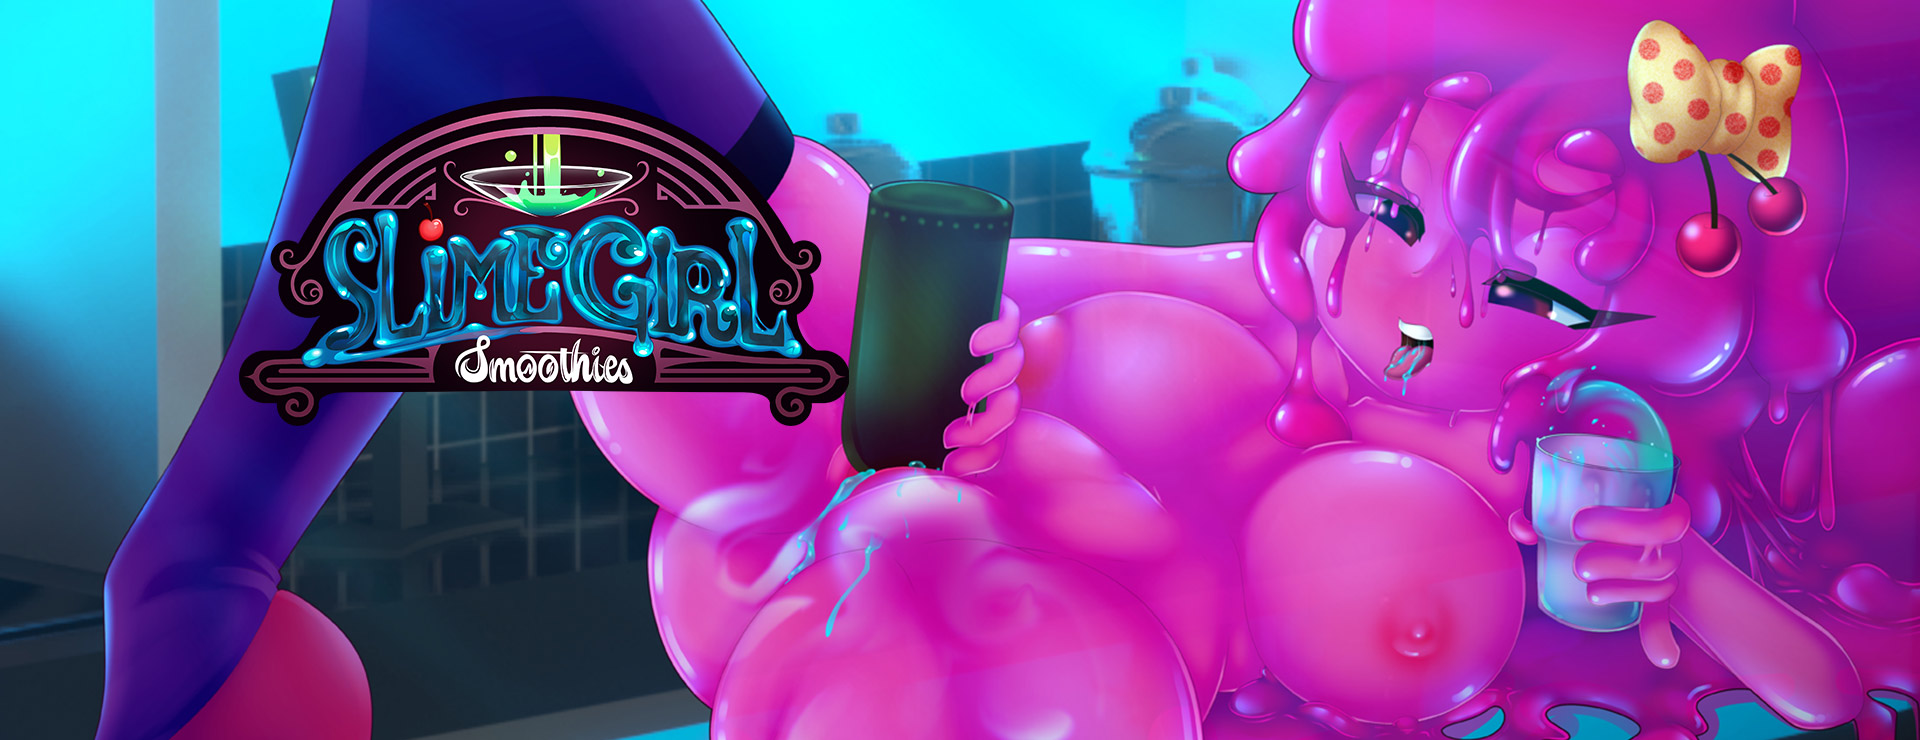 Slime Girl Smoothies - Casual Game